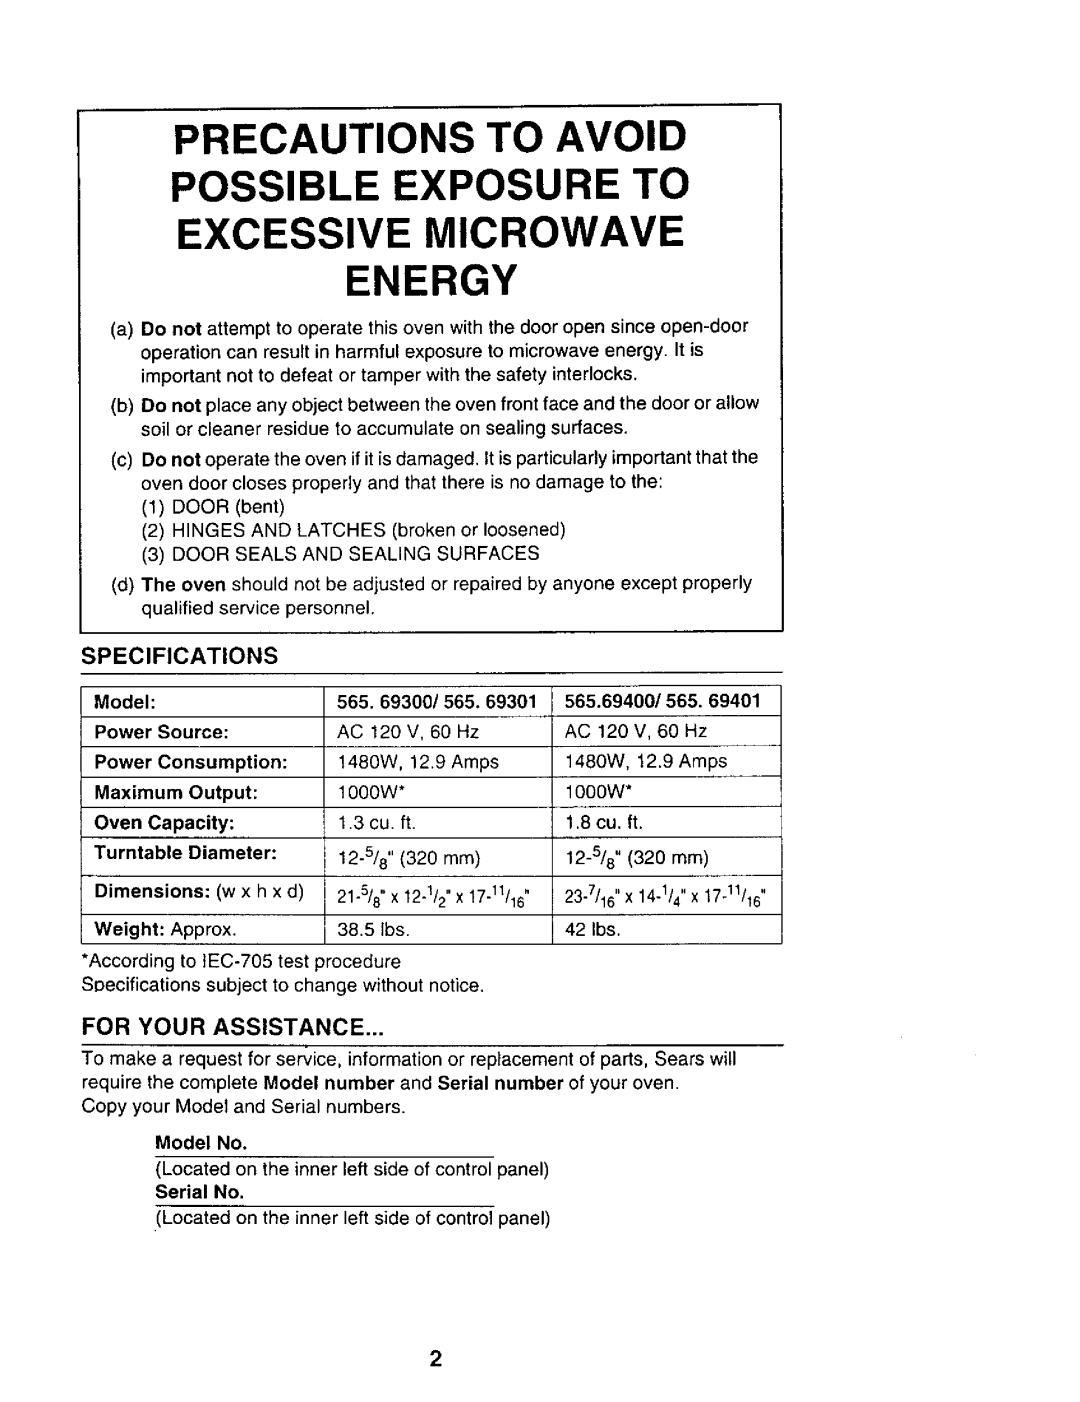 Sears 565.694 Precautions To Avoid Possible Exposure To, Excessive Microwave Energy, Specifications, For Your Assistance 